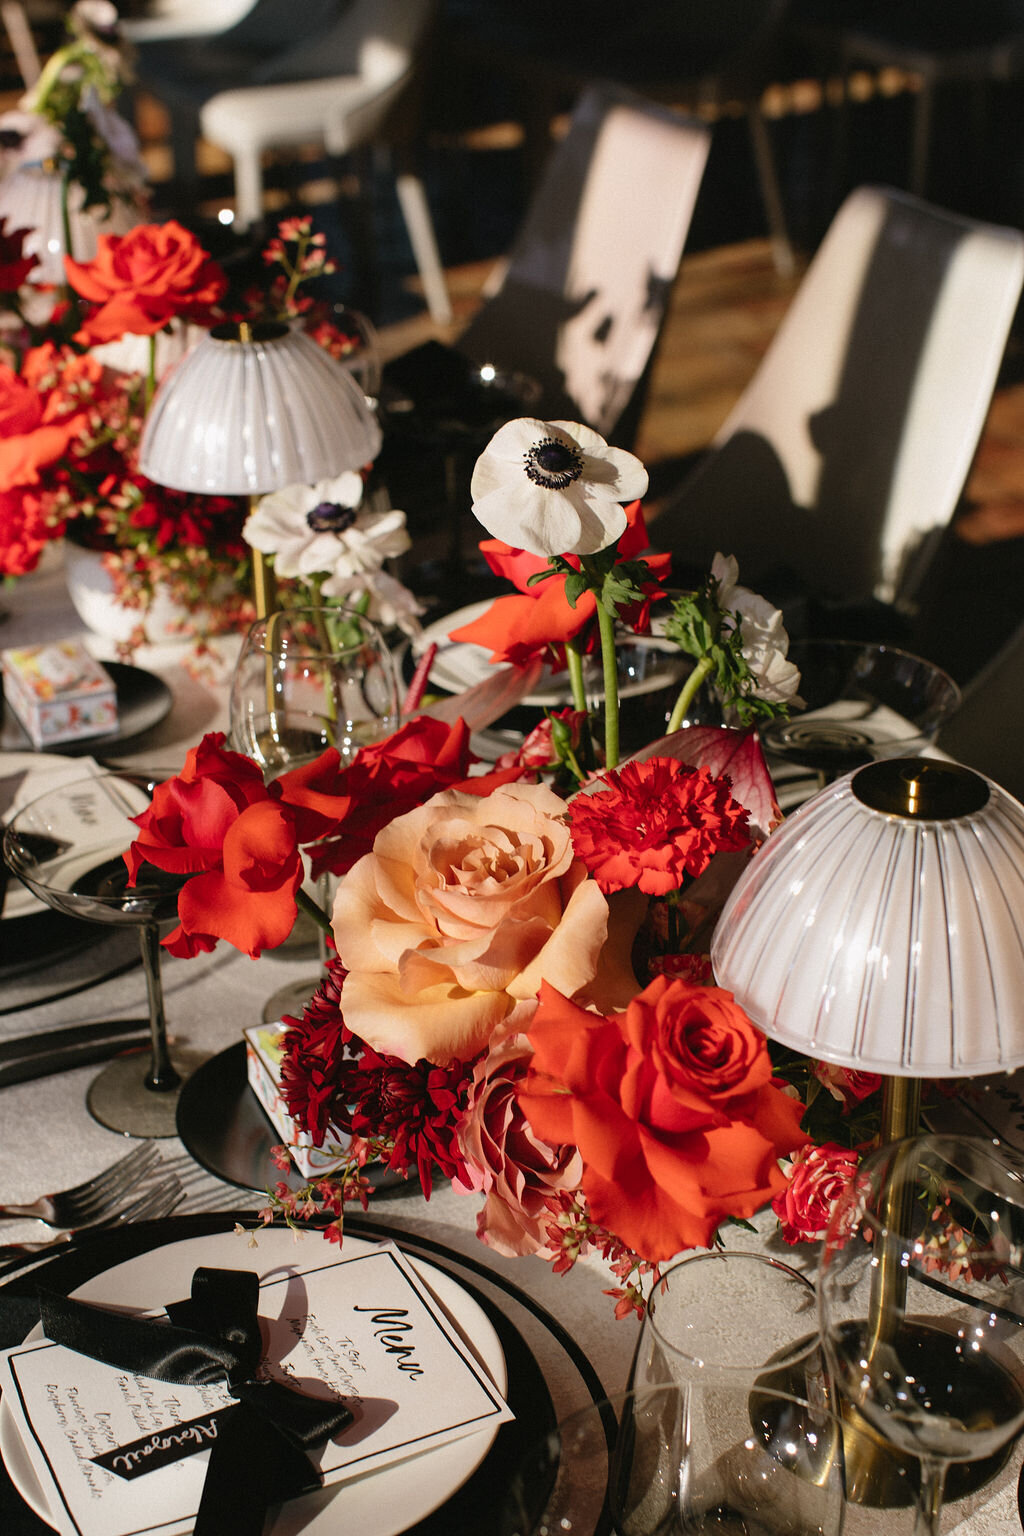 Multi-course dinner for wedding with menus and table lamps supper club aesthetic